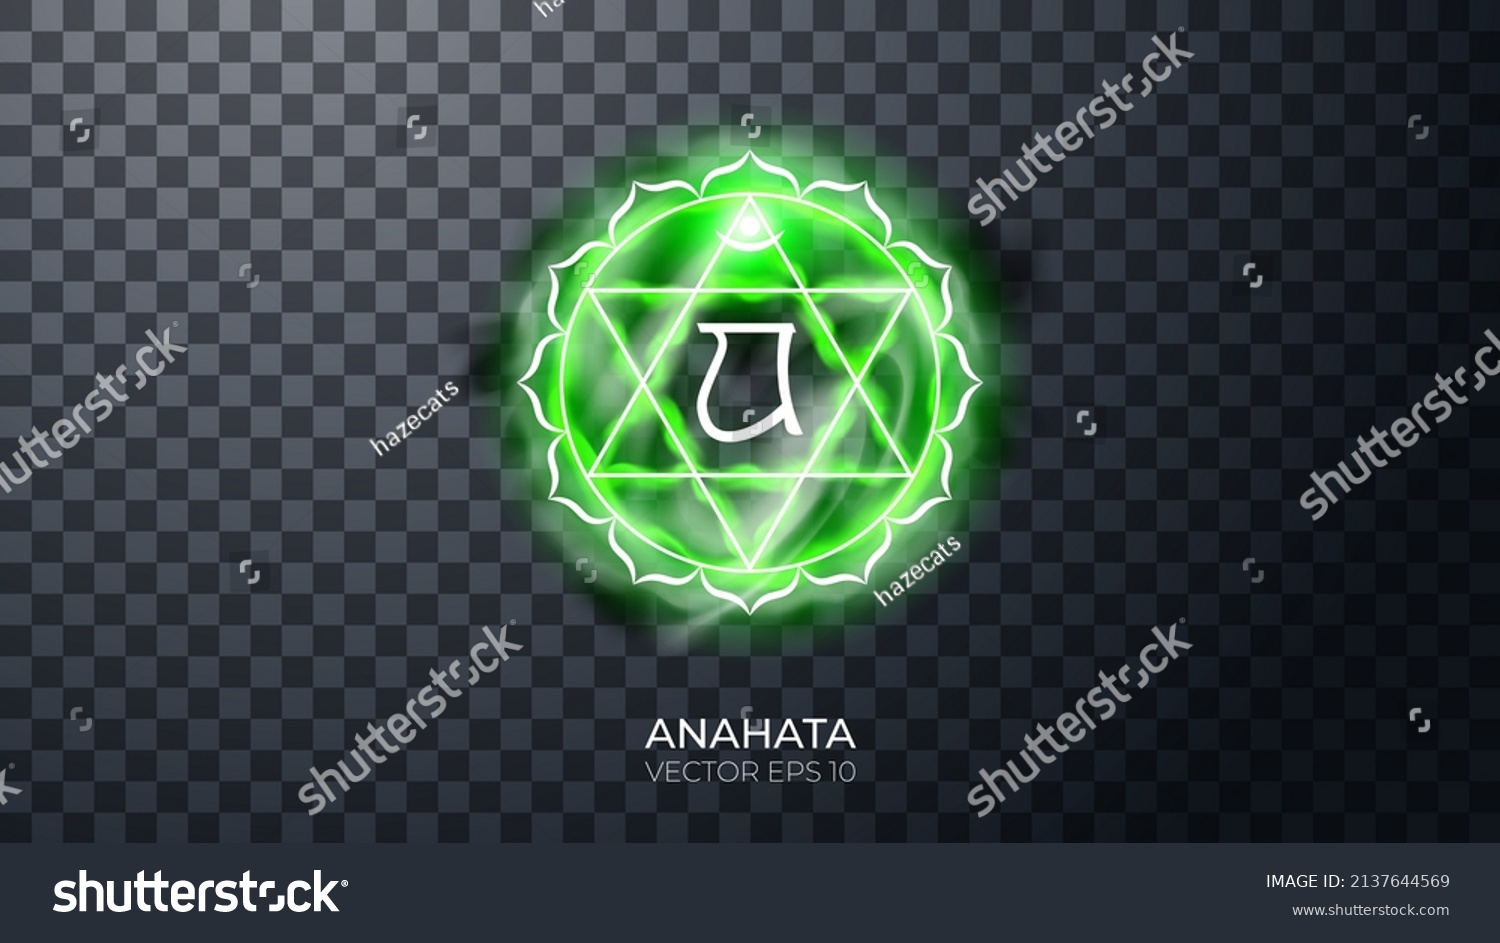 SVG of Illustration of one of the seven chakras - Anahata, the symbol of Hinduism, Buddhism. Fourth, heart chakra. Ethereal strange fire sign. Decor elements for magic doctor, shaman, medium. svg